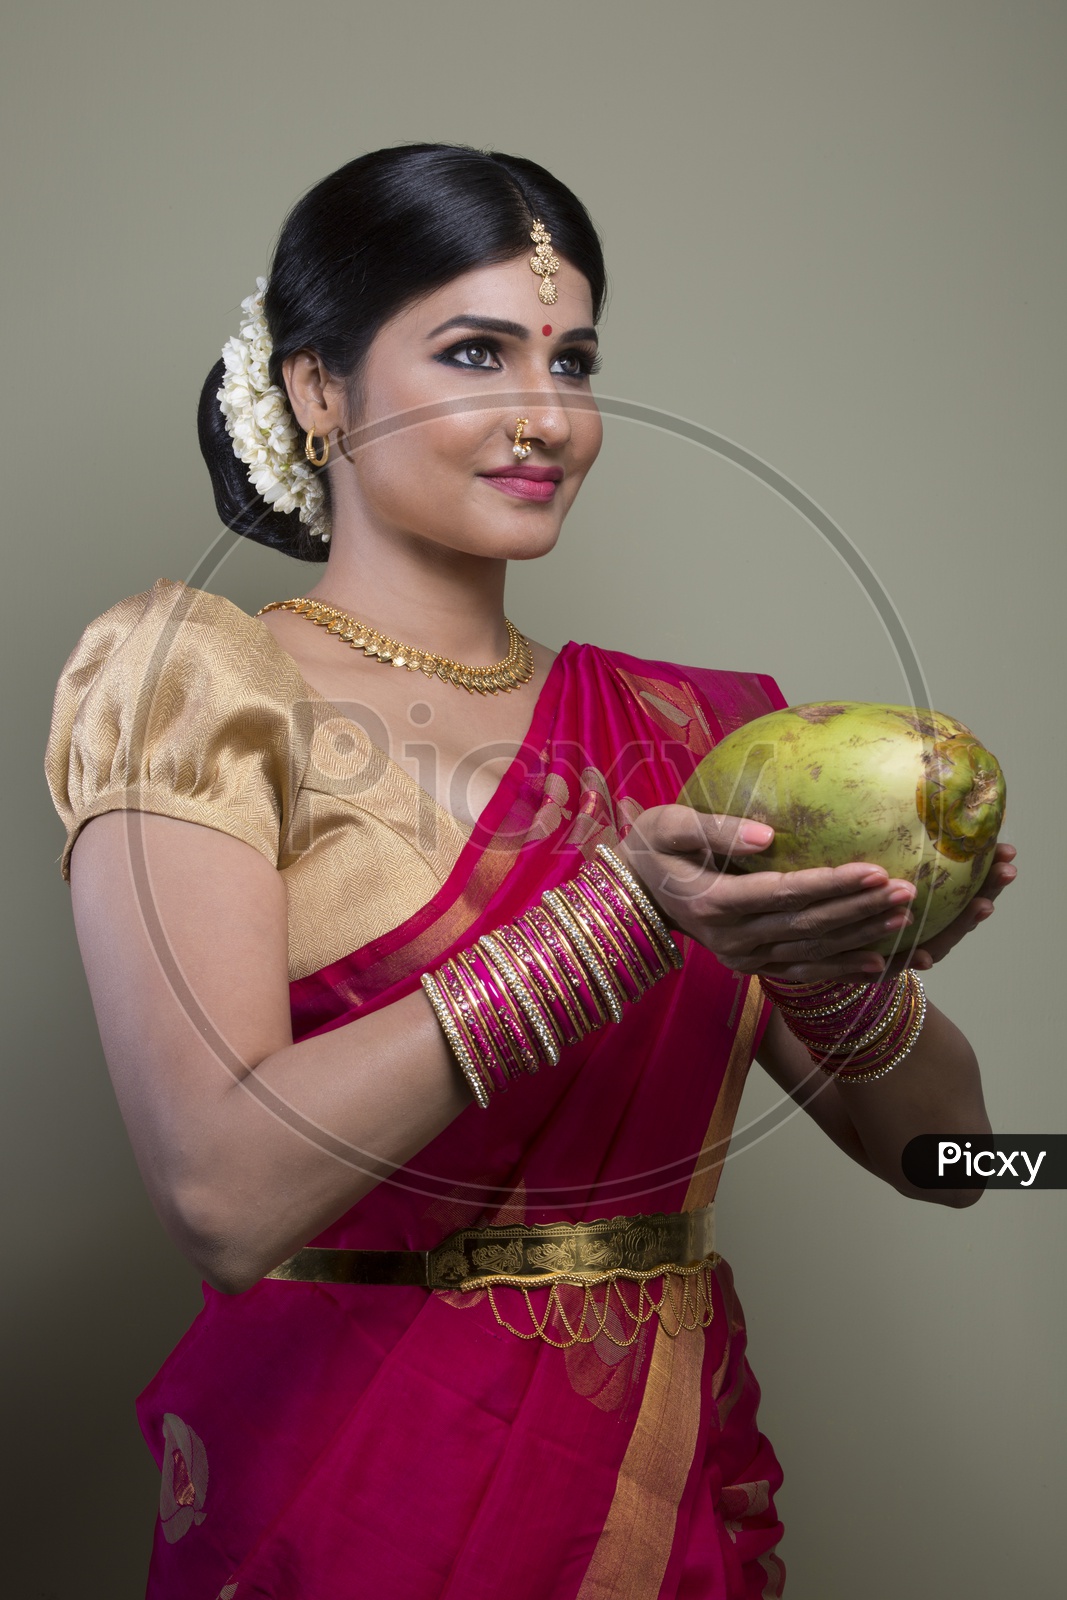 A Beautiful Indian Female Model  in Traditional Attire Wearing a Saree and Jewelry with an Expression and With a Coconut in Hand   on an Studio Closeup shot